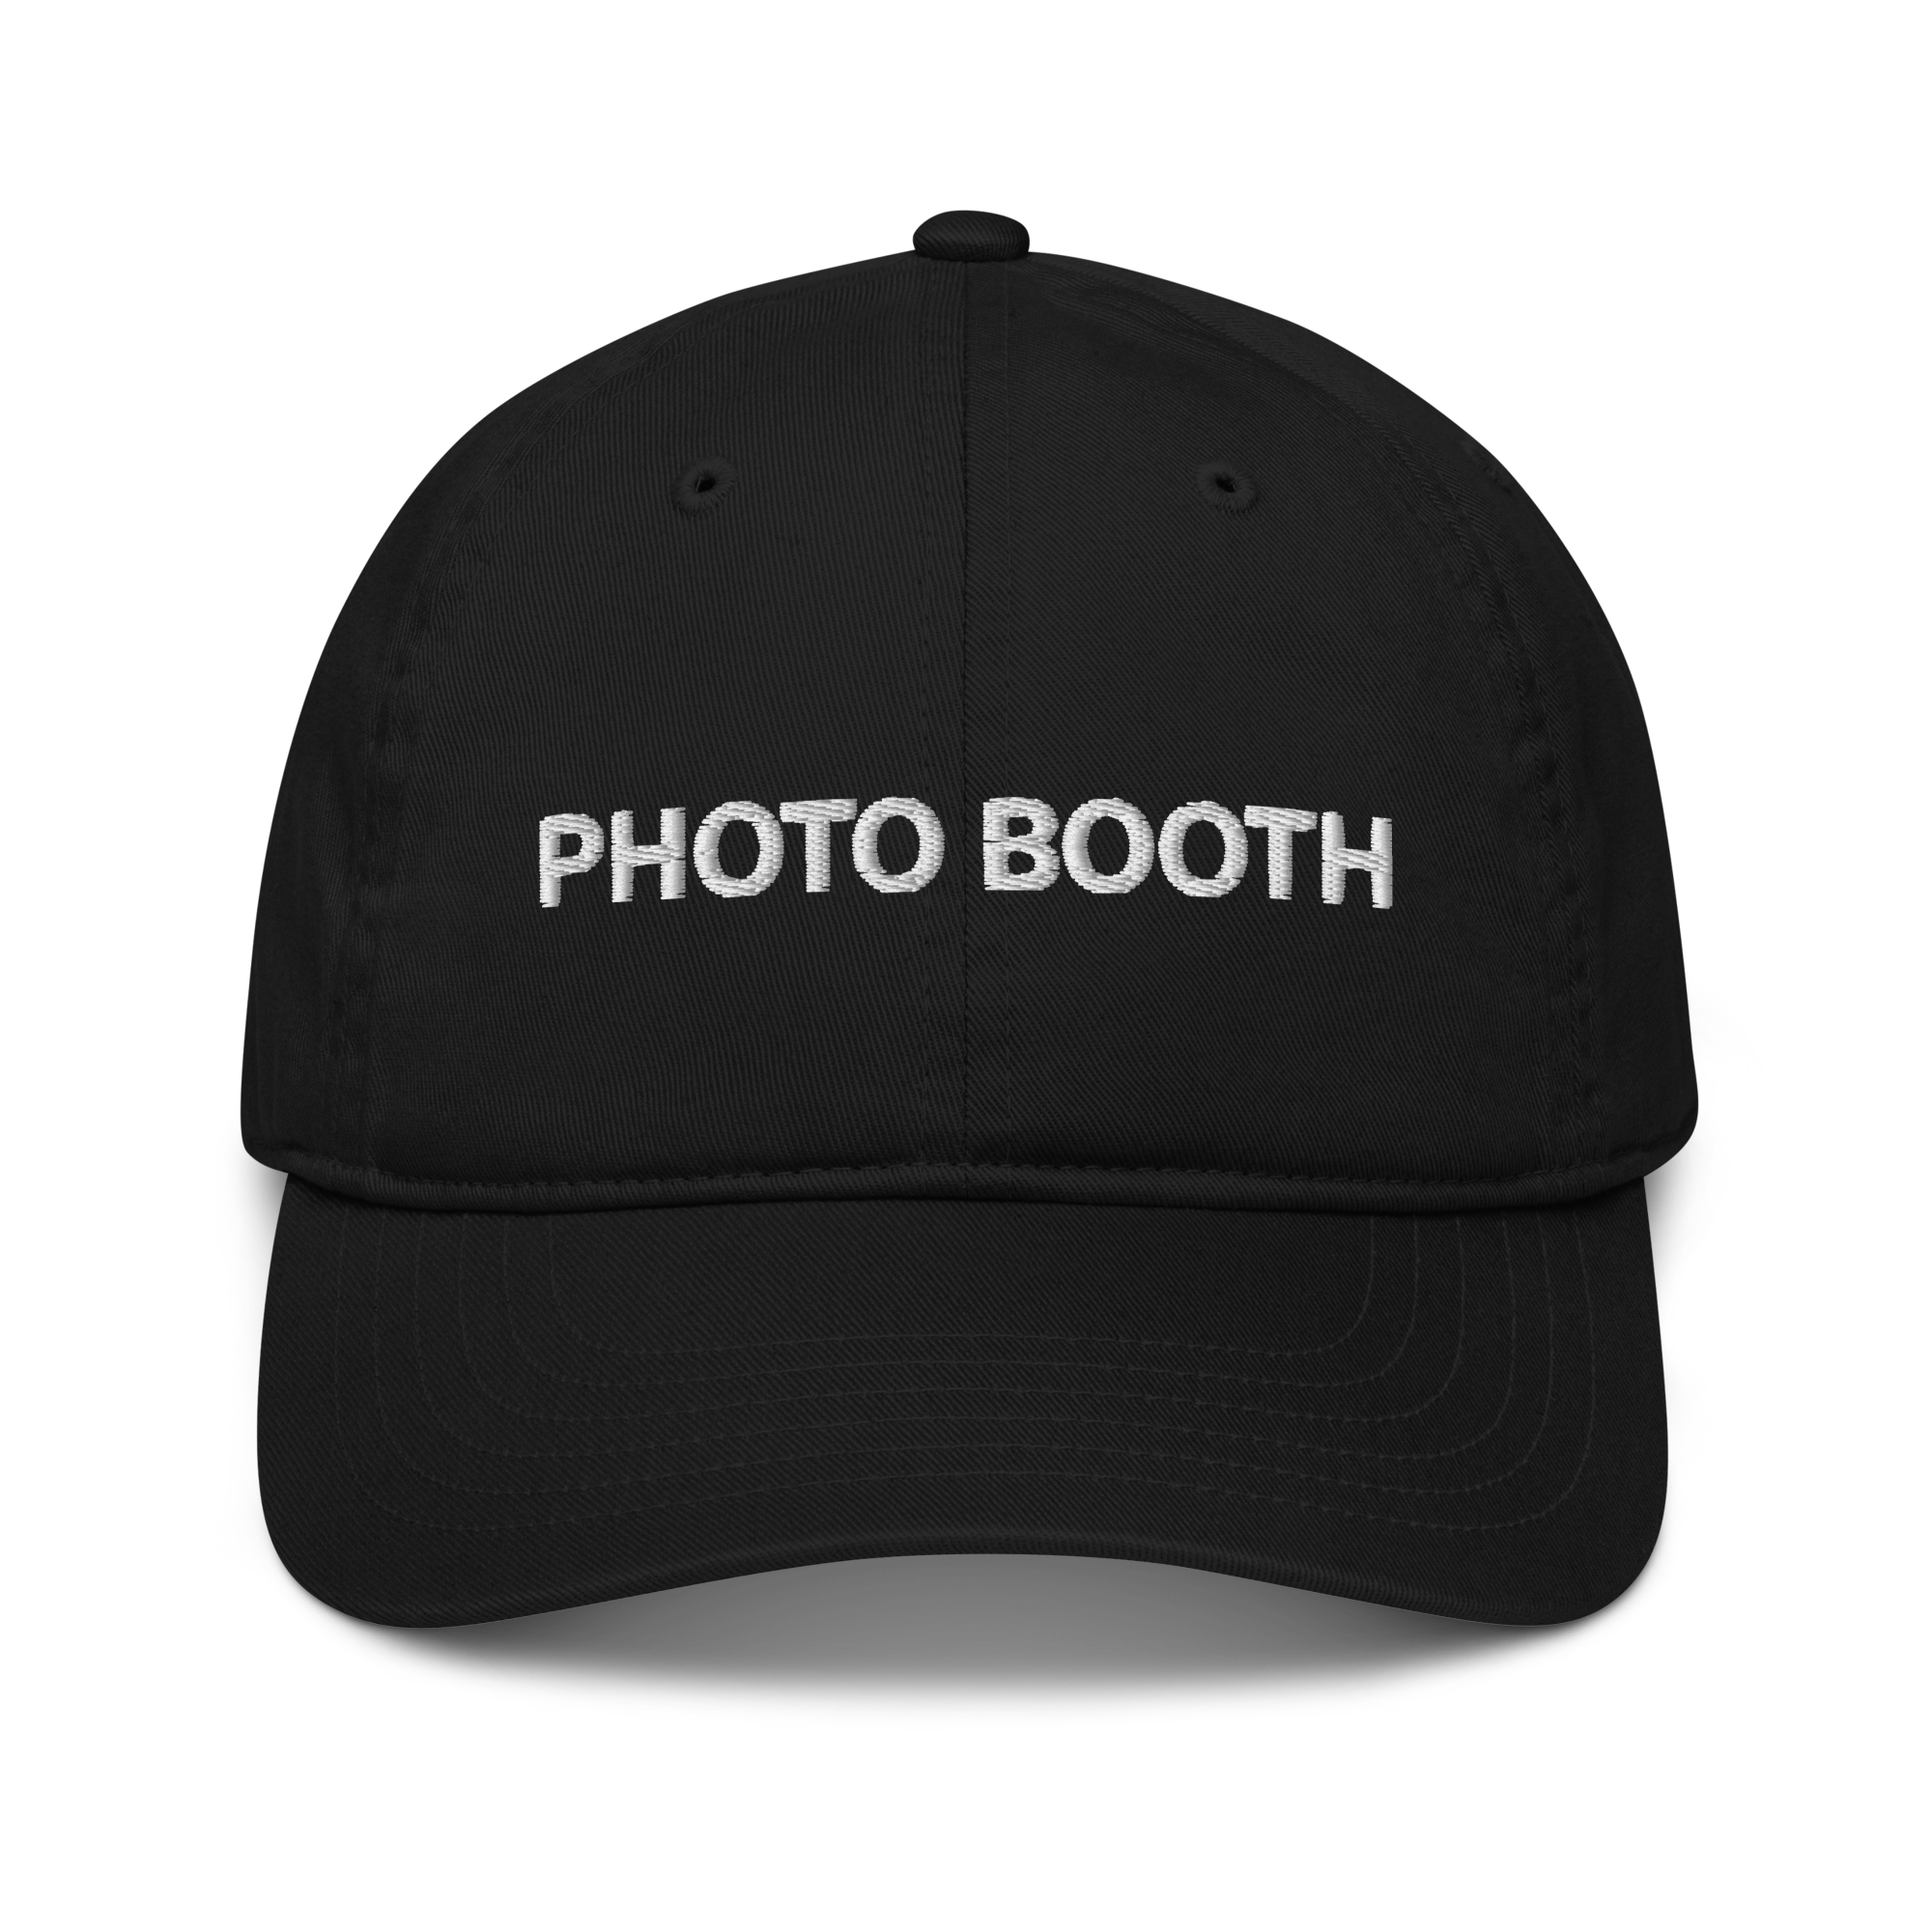 "Photo Booth" Hat